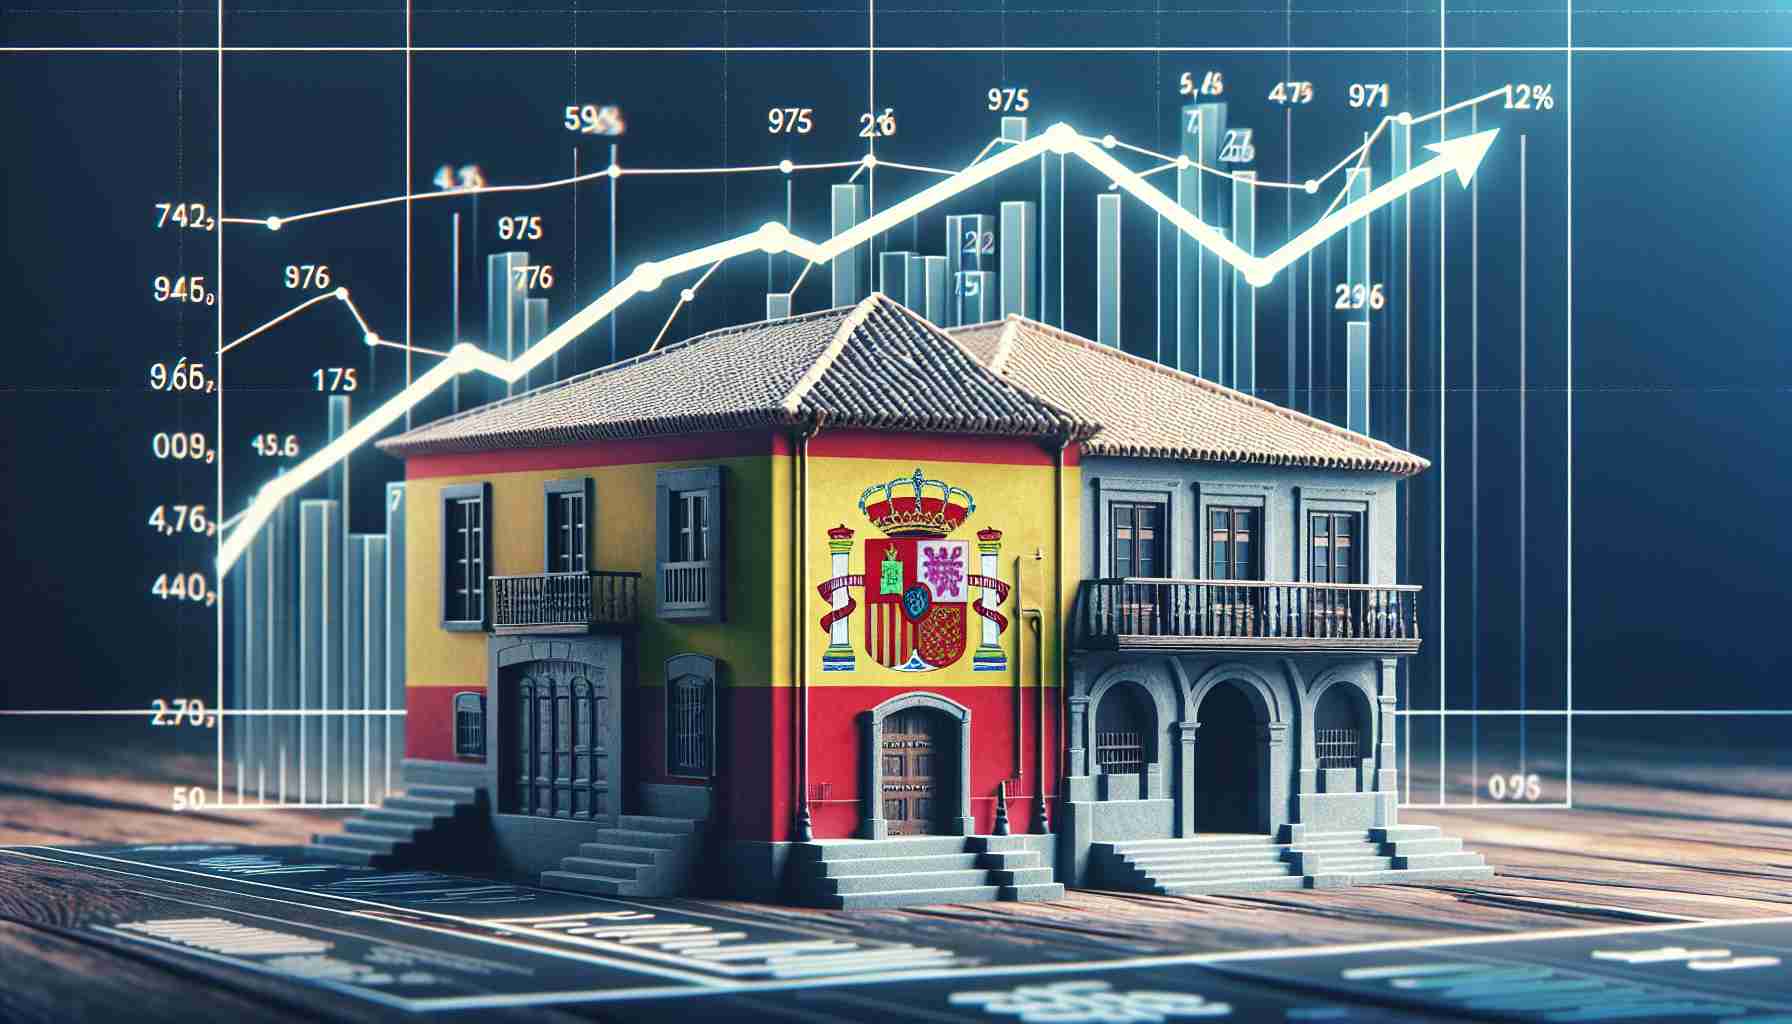 An HD realistic image representing the changing trends of mortgage in Spain. The image should reflect statistical data such as a line graph or bar chart and include symbols or settings synonymous with Spain and mortgage, such as traditional Spanish architecture being divided by a line graph showing progressive statistics that represent fluctuating mortgage rates over a span of decades.